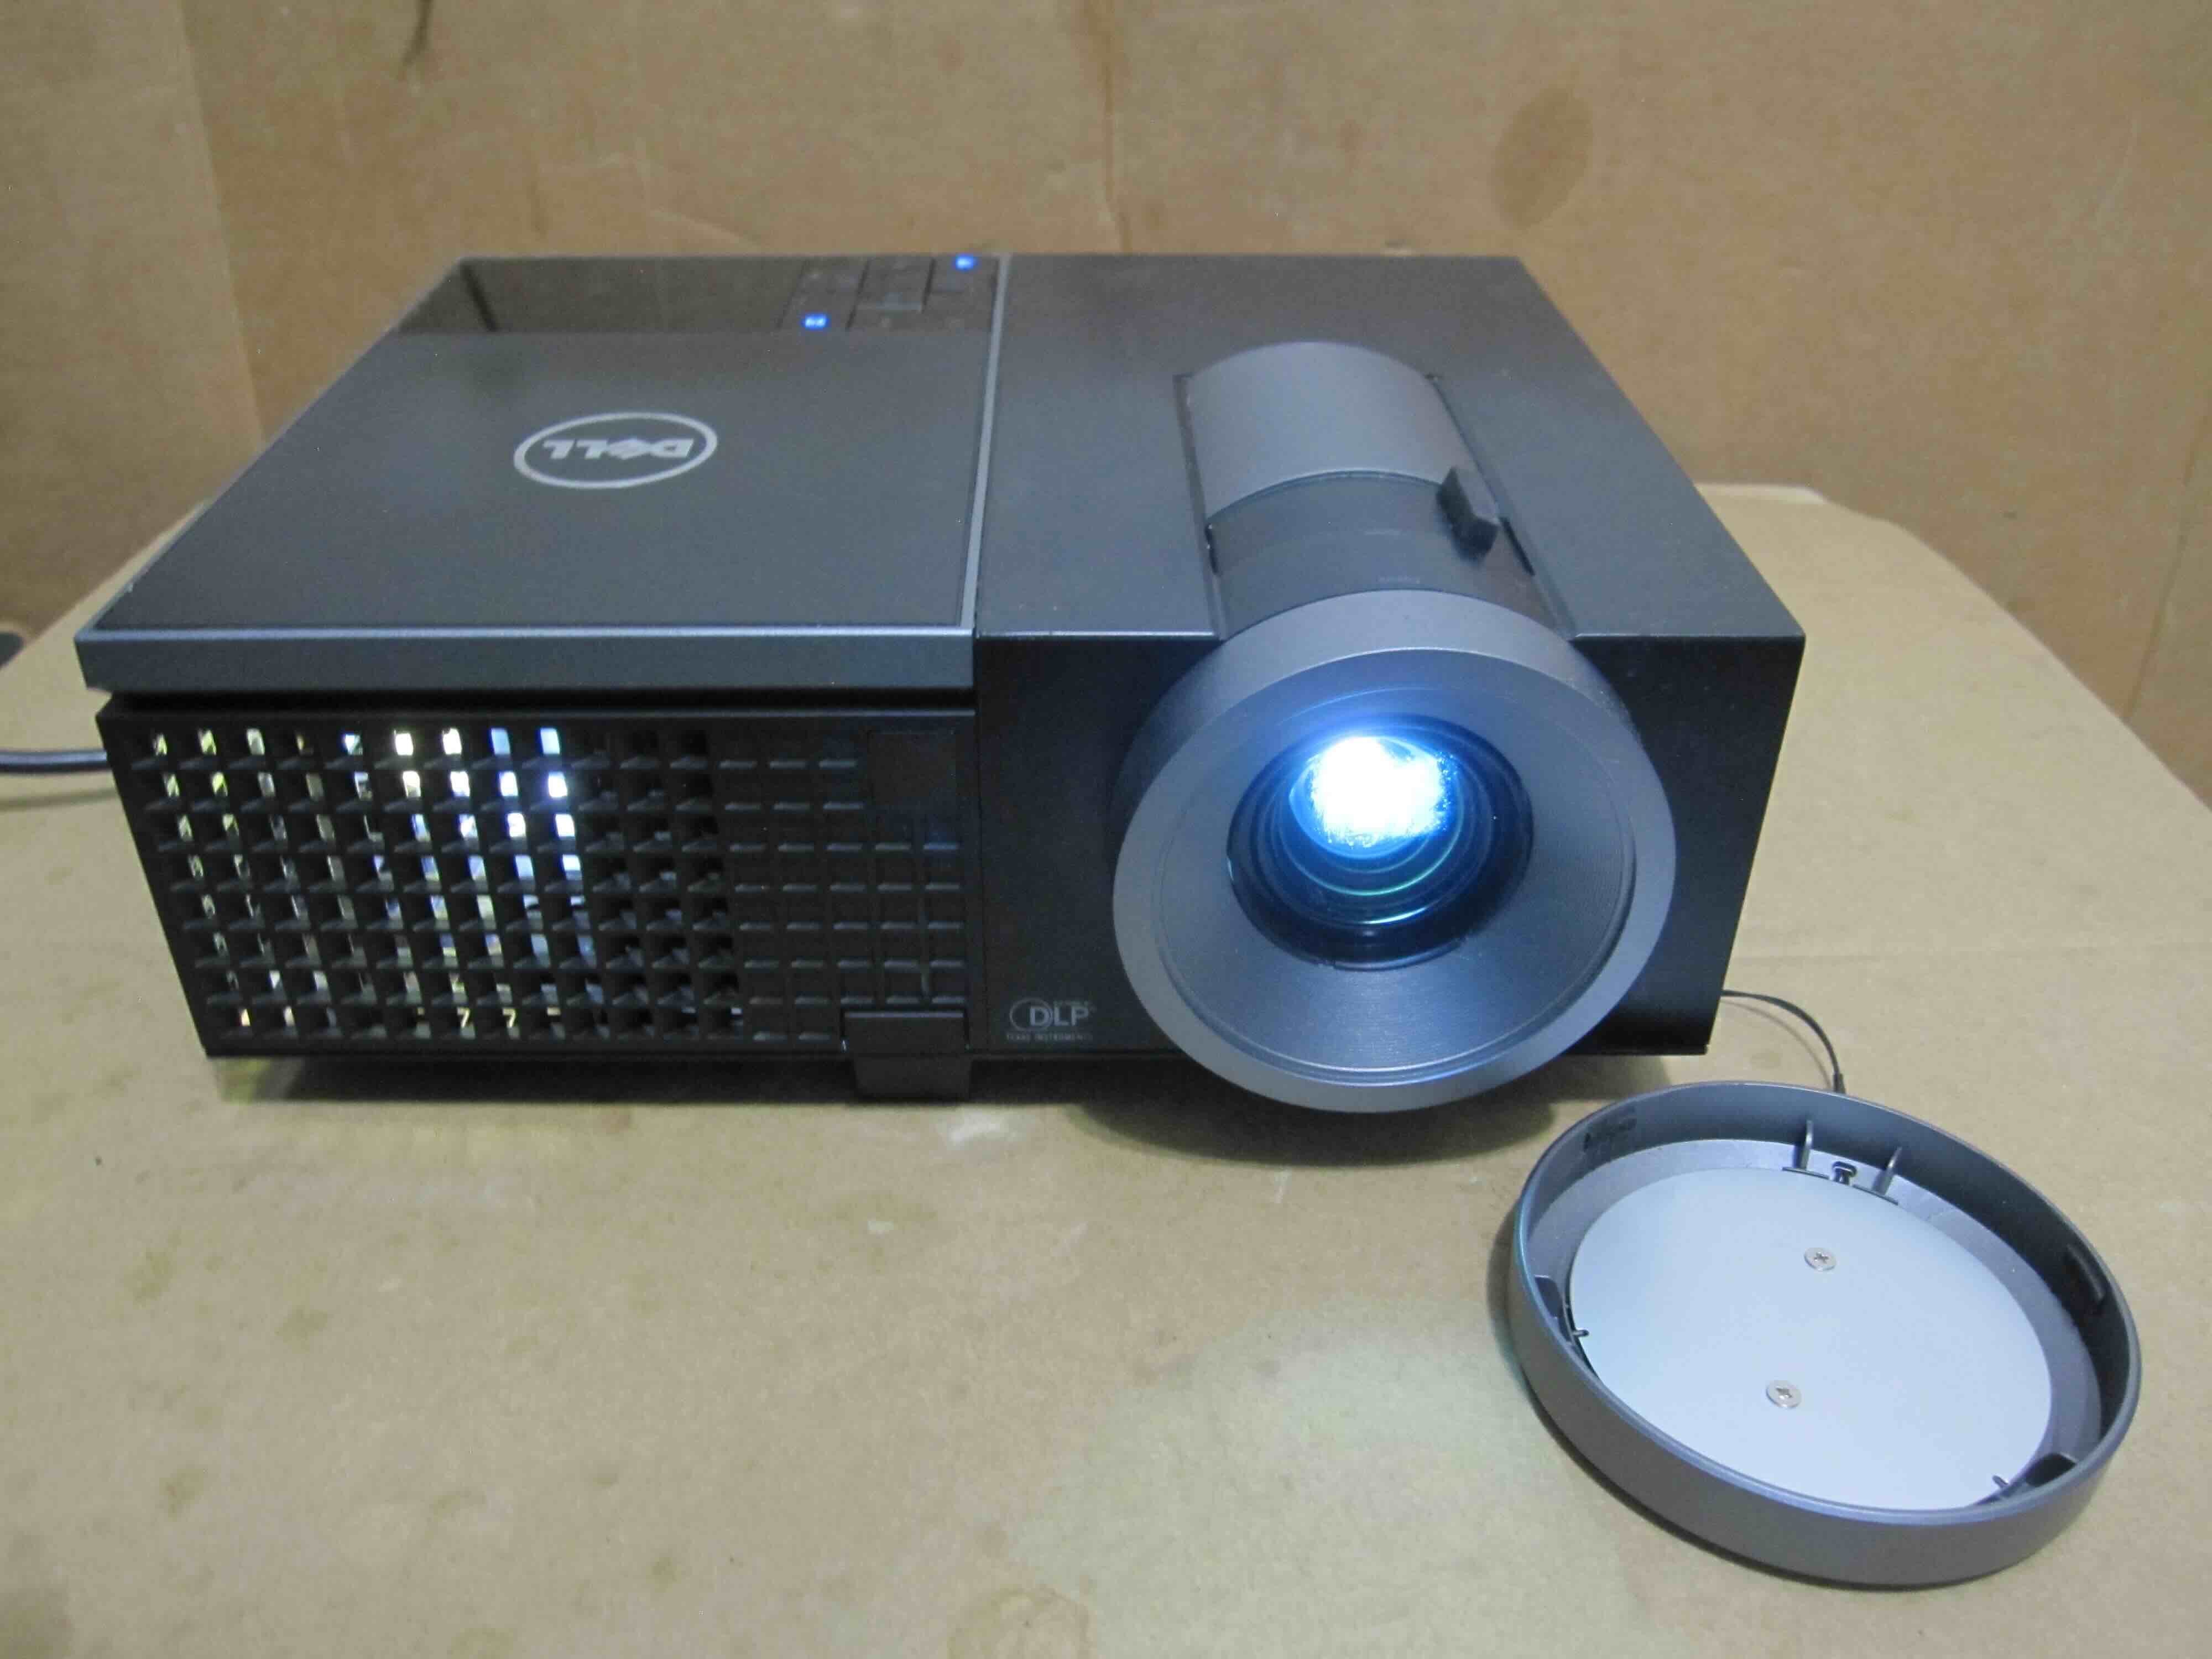 How Does Windows 8.1 Transmit Display Signals To A Network Projector